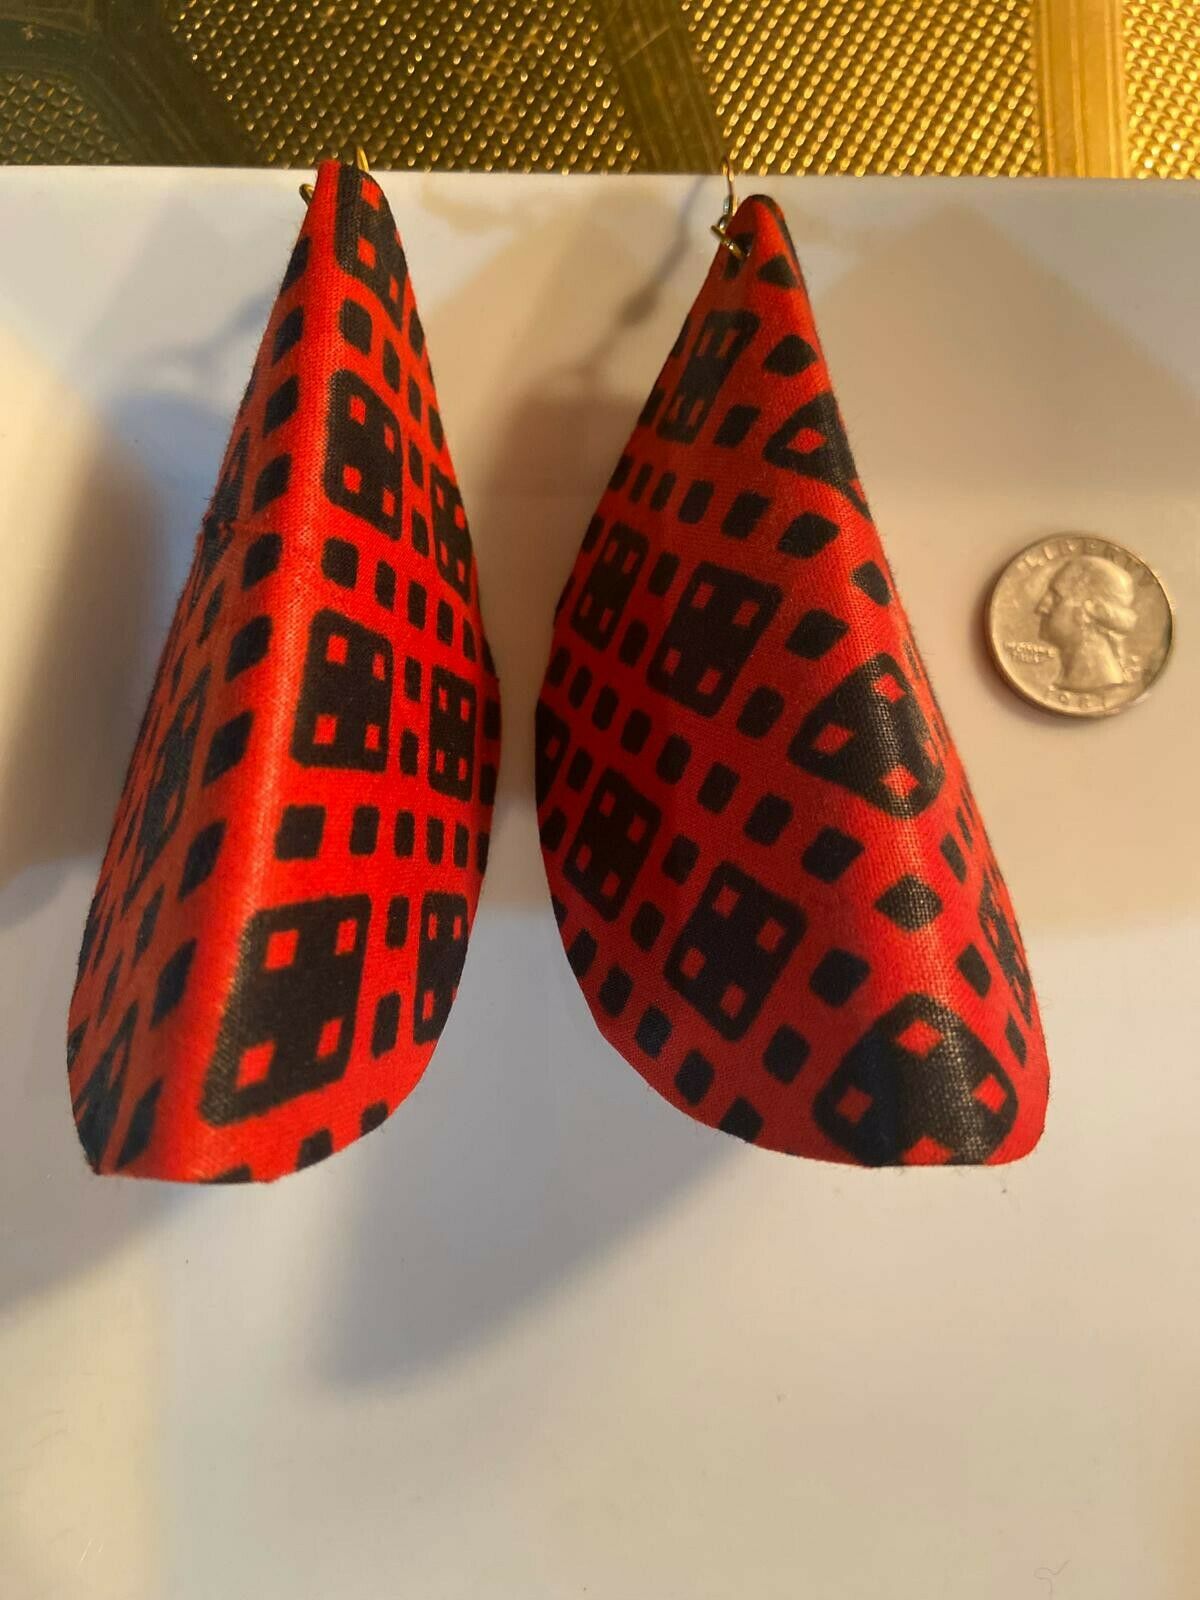 African Print Butterfly Earrings Red~ $12 Ships Free